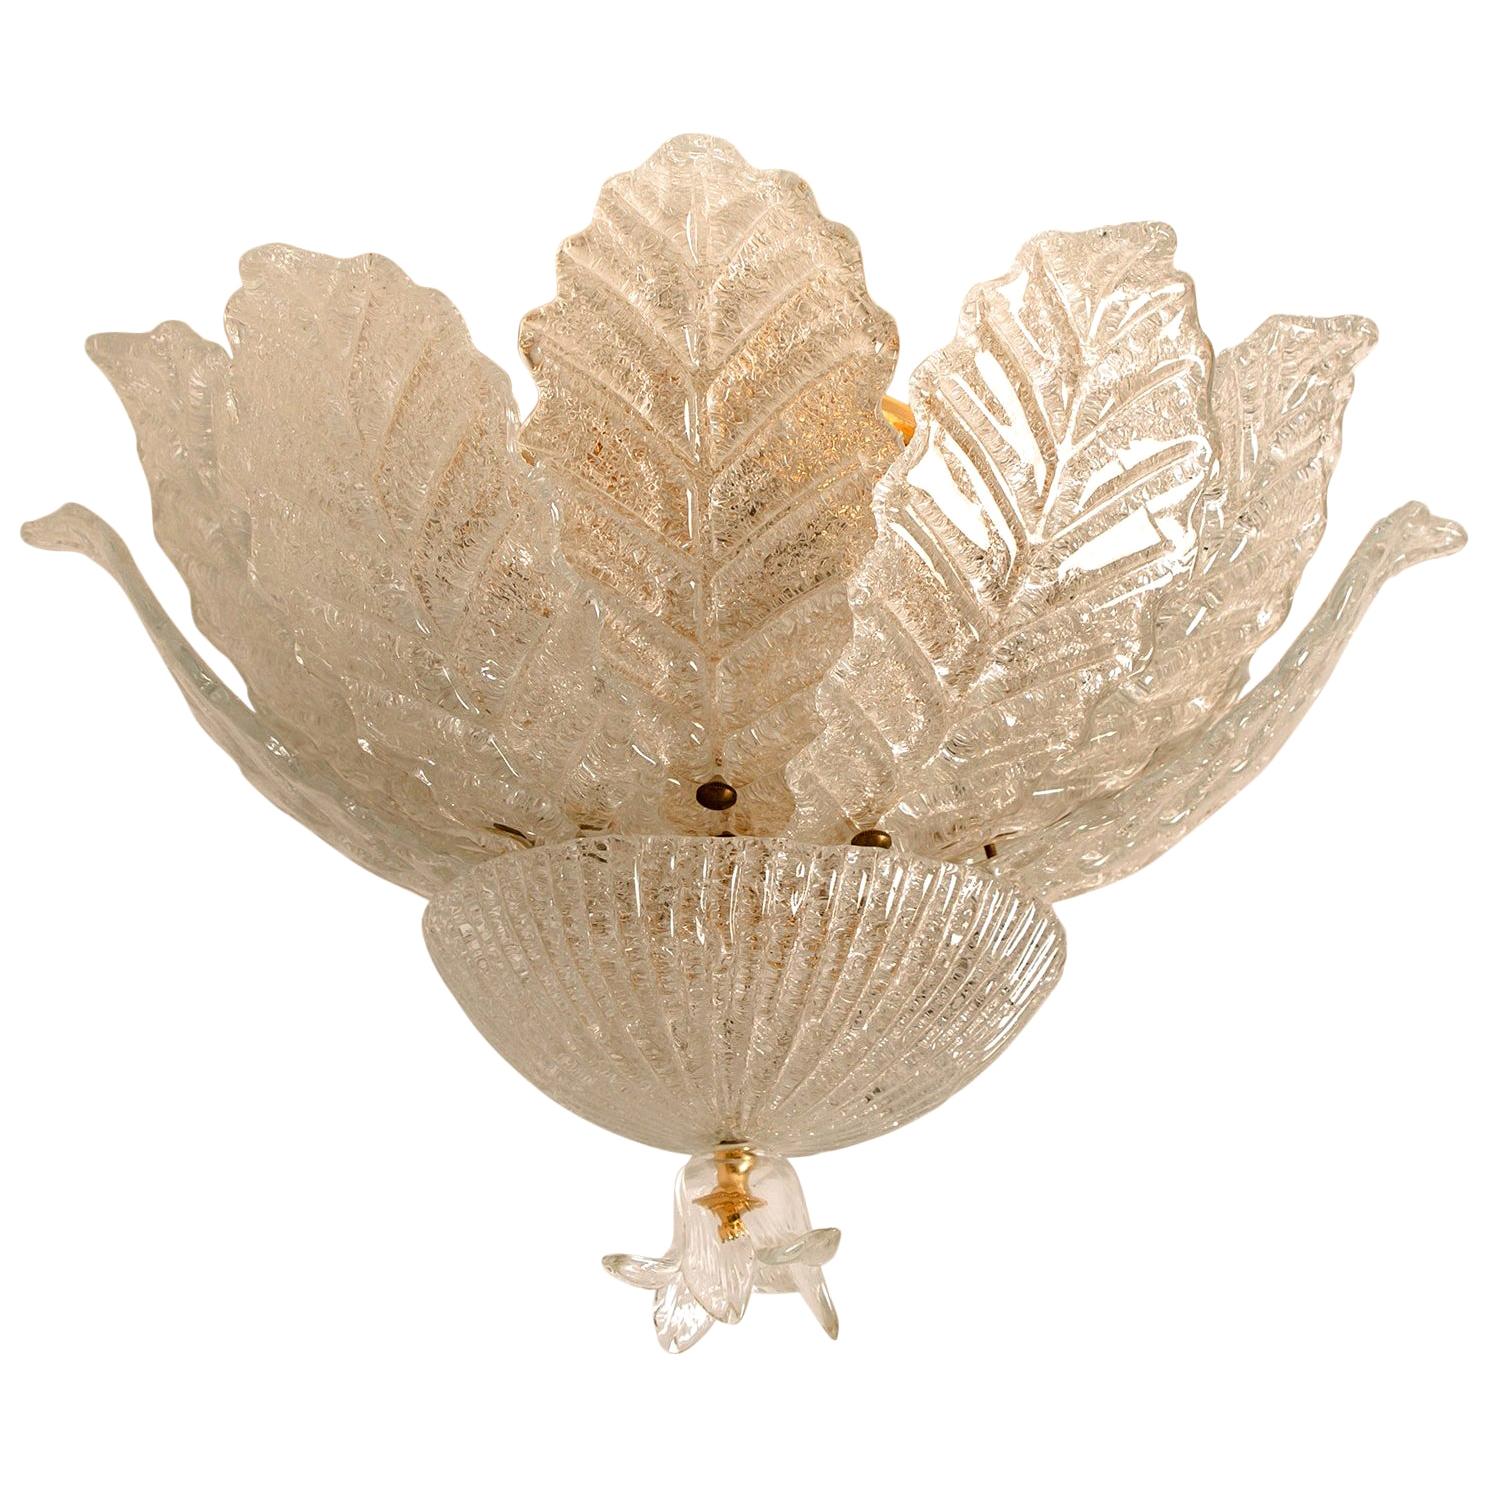 An elegant hand blown Murano glass flushmount of Barovier & Toso. The light fixture consists 12 blown Murano glass leaves. Mounted on a brass frame. The leaves refract light beautifully. The flush mount fills the room with a soft, warm and welcoming